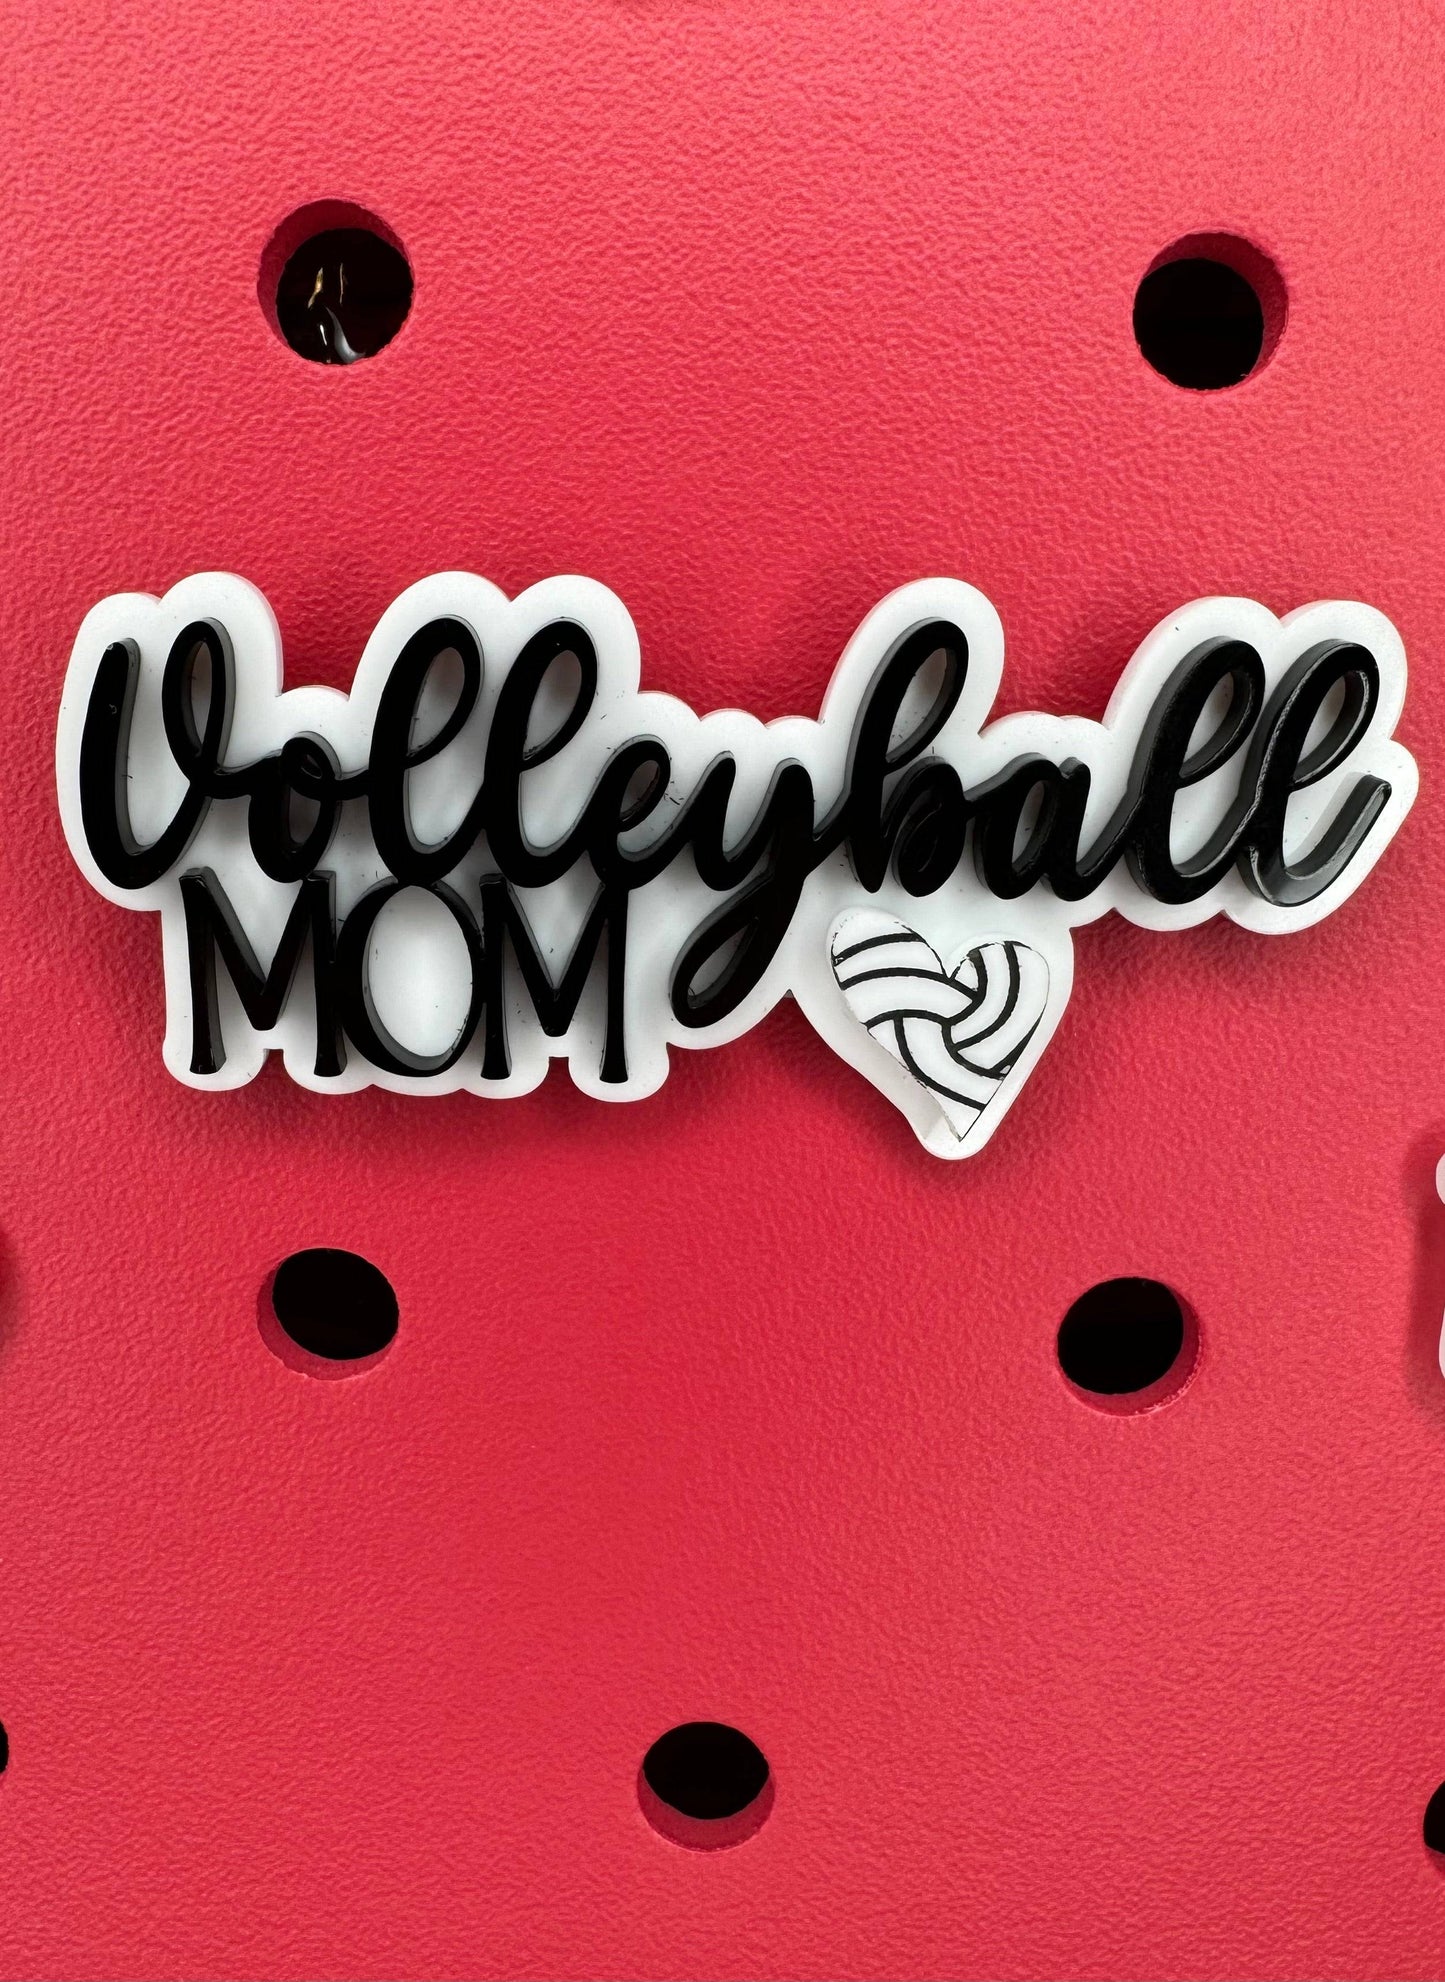 Sports Mom Charm for Bogg Style Bags - Supportive Mom Bag Accessory - Versatile Sports Theme - Perfect for Soccer, Baseball, Football Moms and Many more